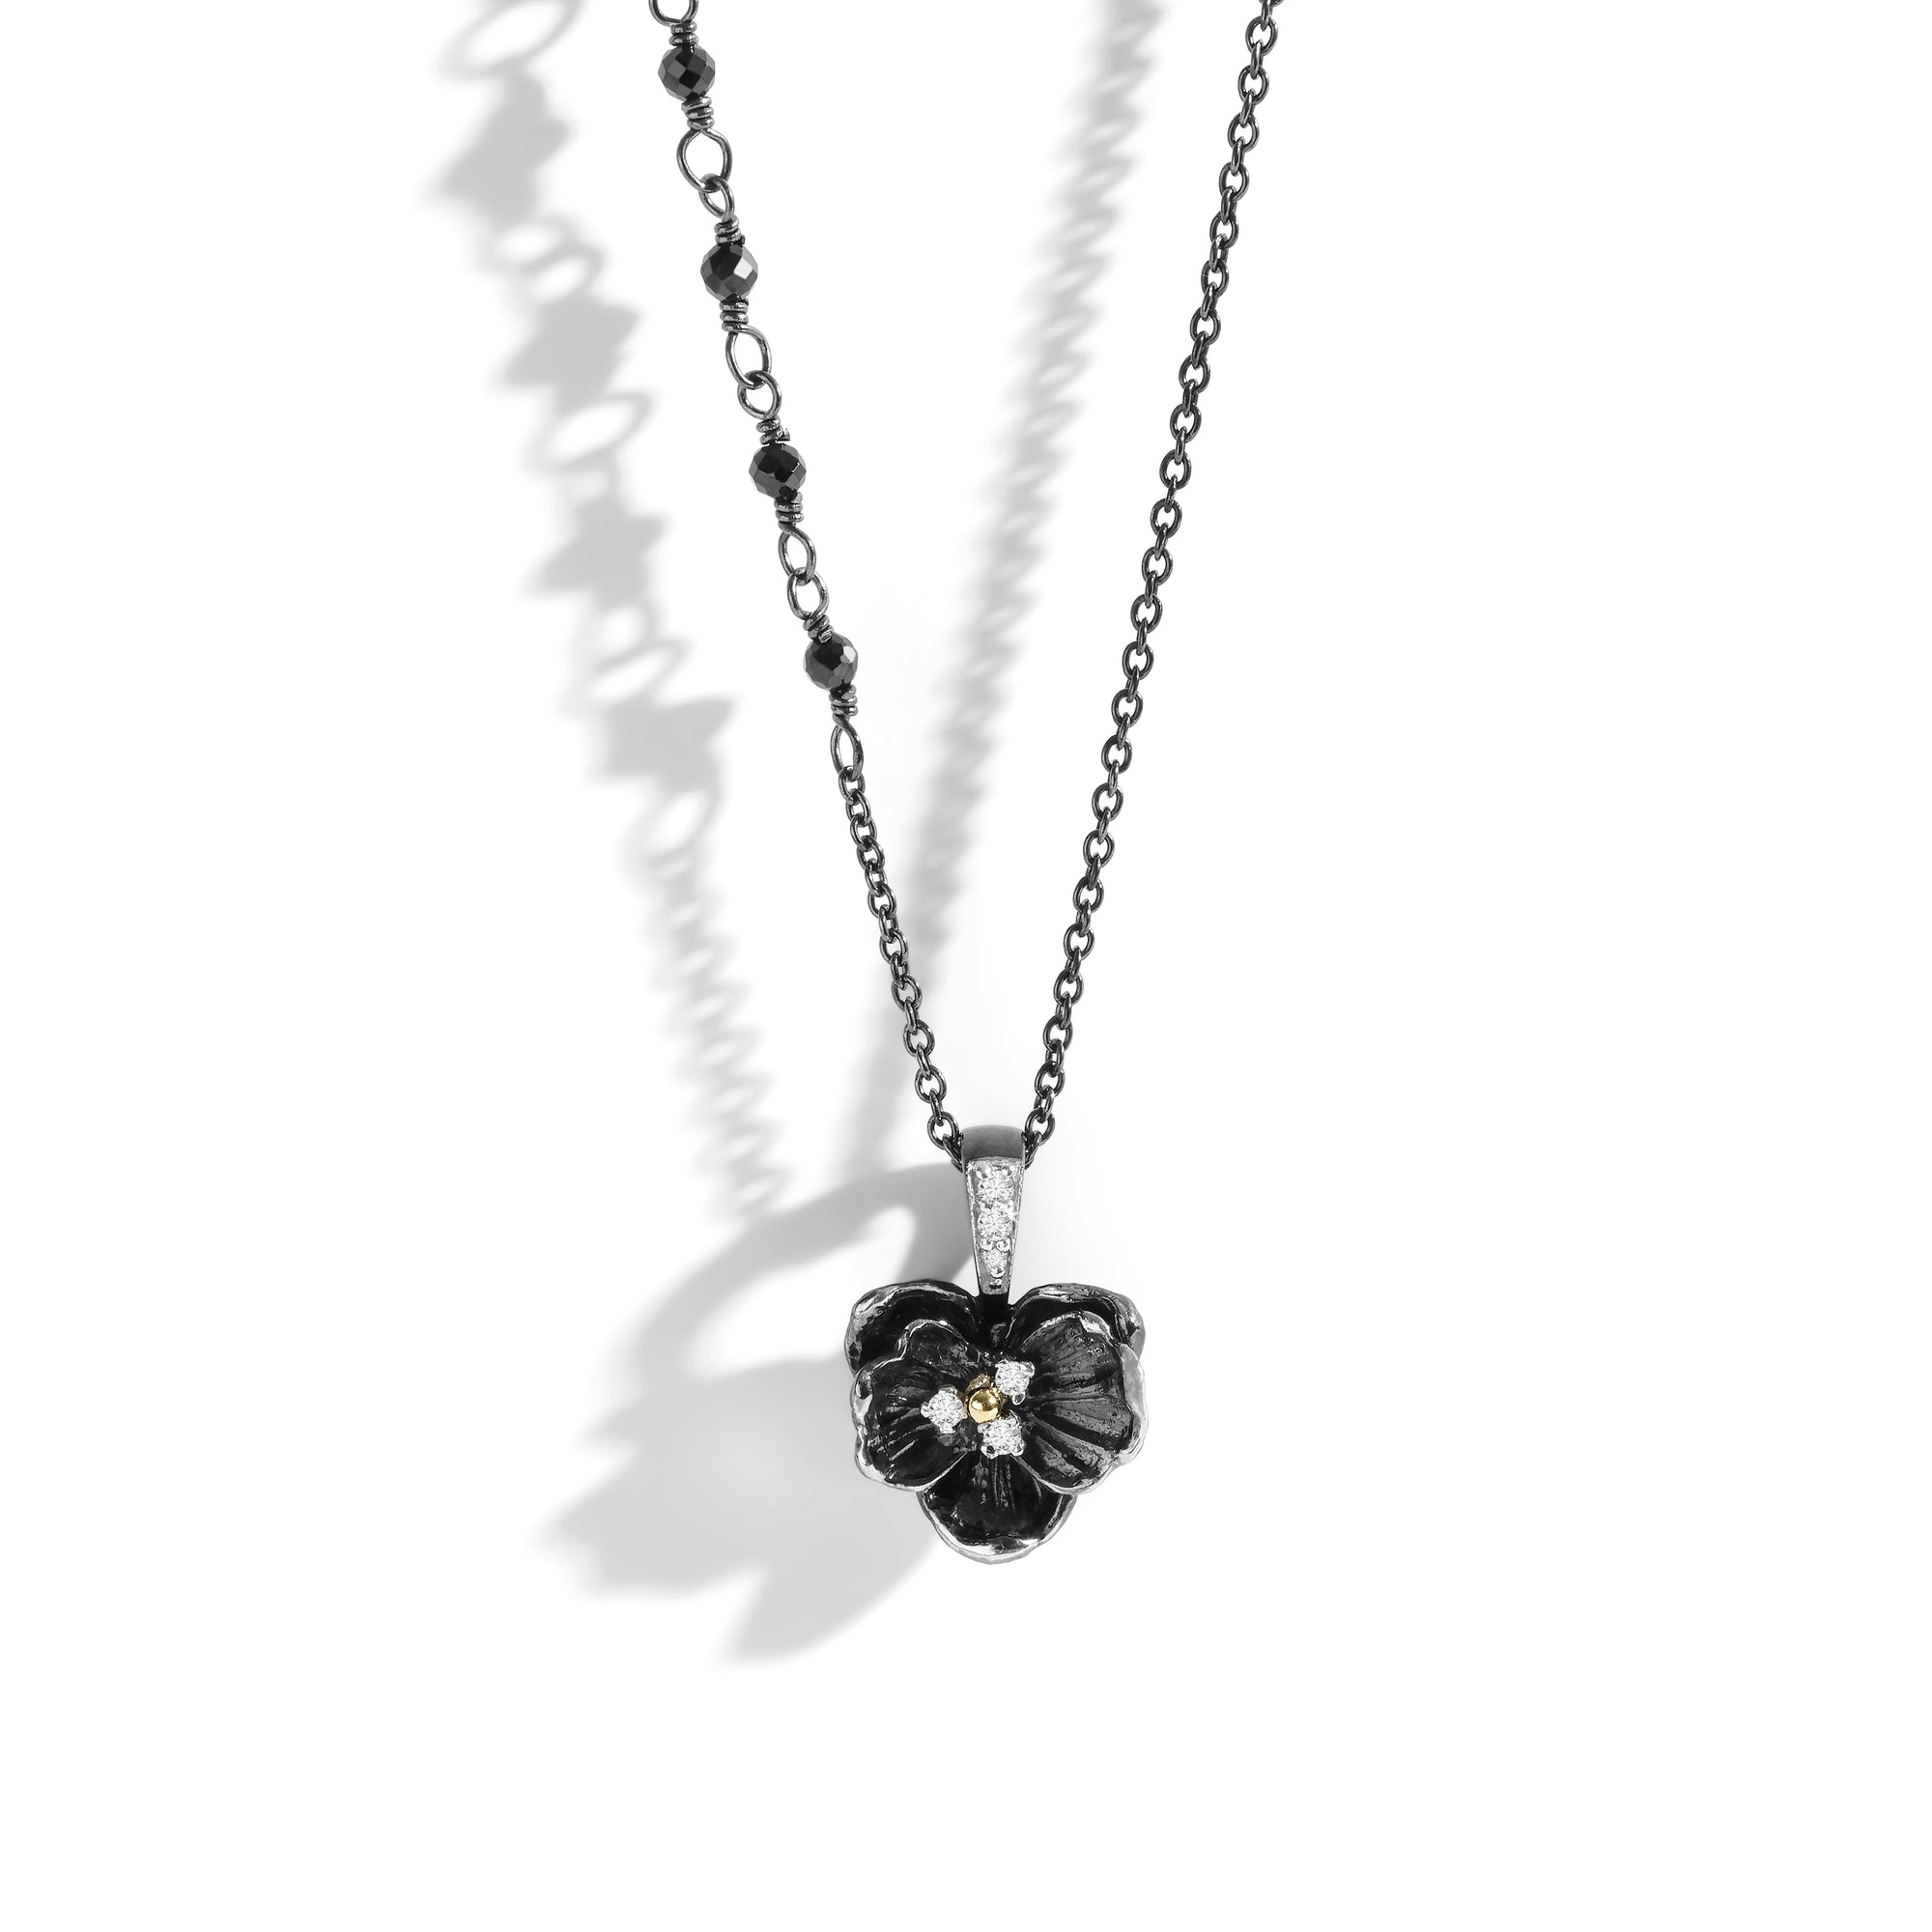 Michael Aram Orchid 11mm Necklace with Diamonds